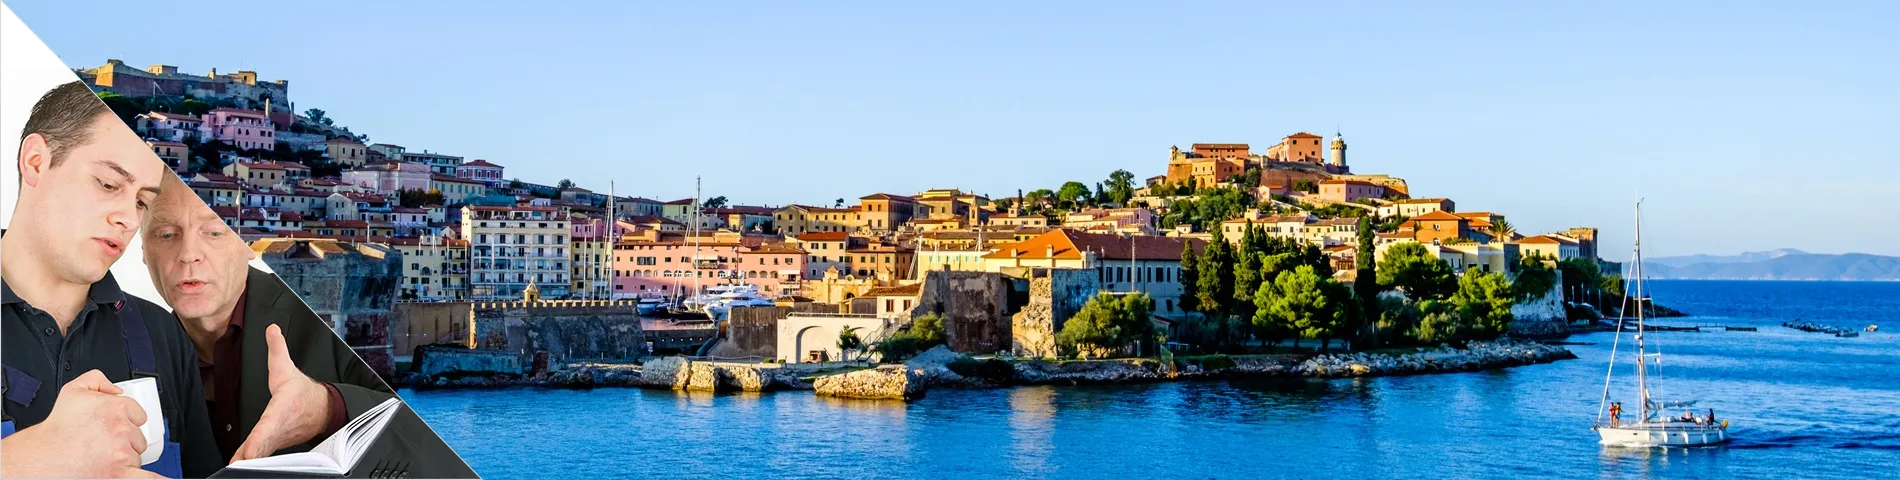 Island of Elba - One-to-One